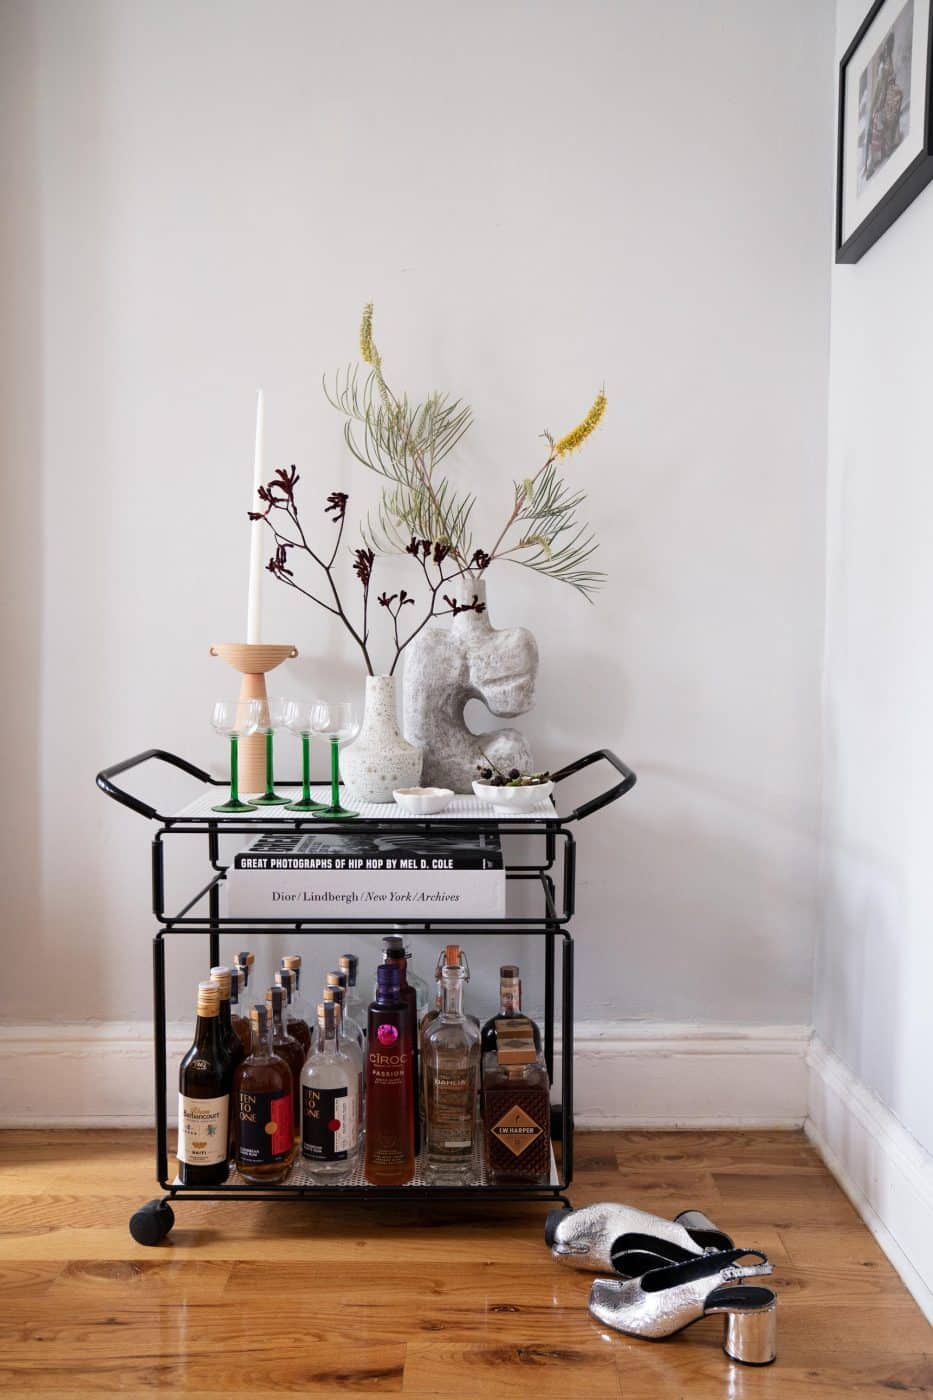 The bar cart in the dining room of Naomi Elizée's Brooklyn apartment